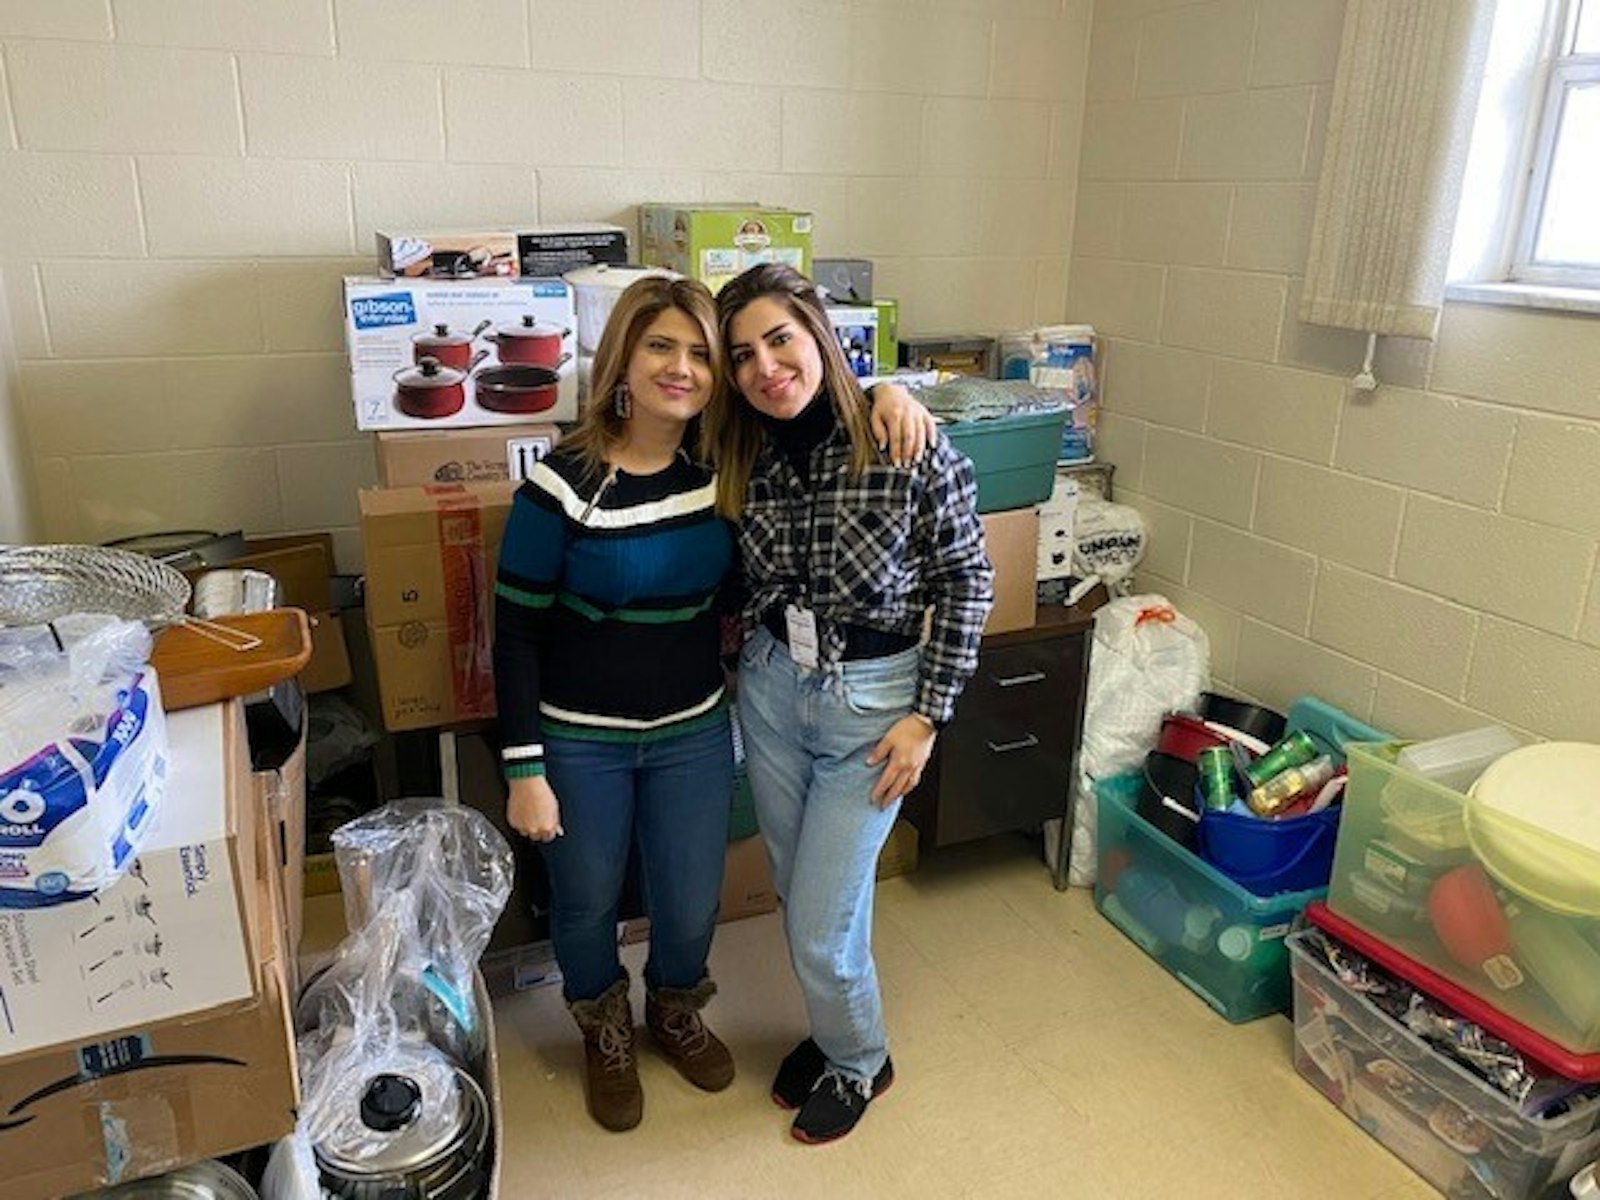 Yasmeen Baban and Baidaa Al-Jashamy of Catholic Charities of Southeast Michigan’s refugee resettlement services stand with supplies collected by St. Irenaeus Parish in Rochester Hills at Catholic Charities’ Royal Oak location. (Photo courtesy of Catholic Charities of Southeast Michigan)